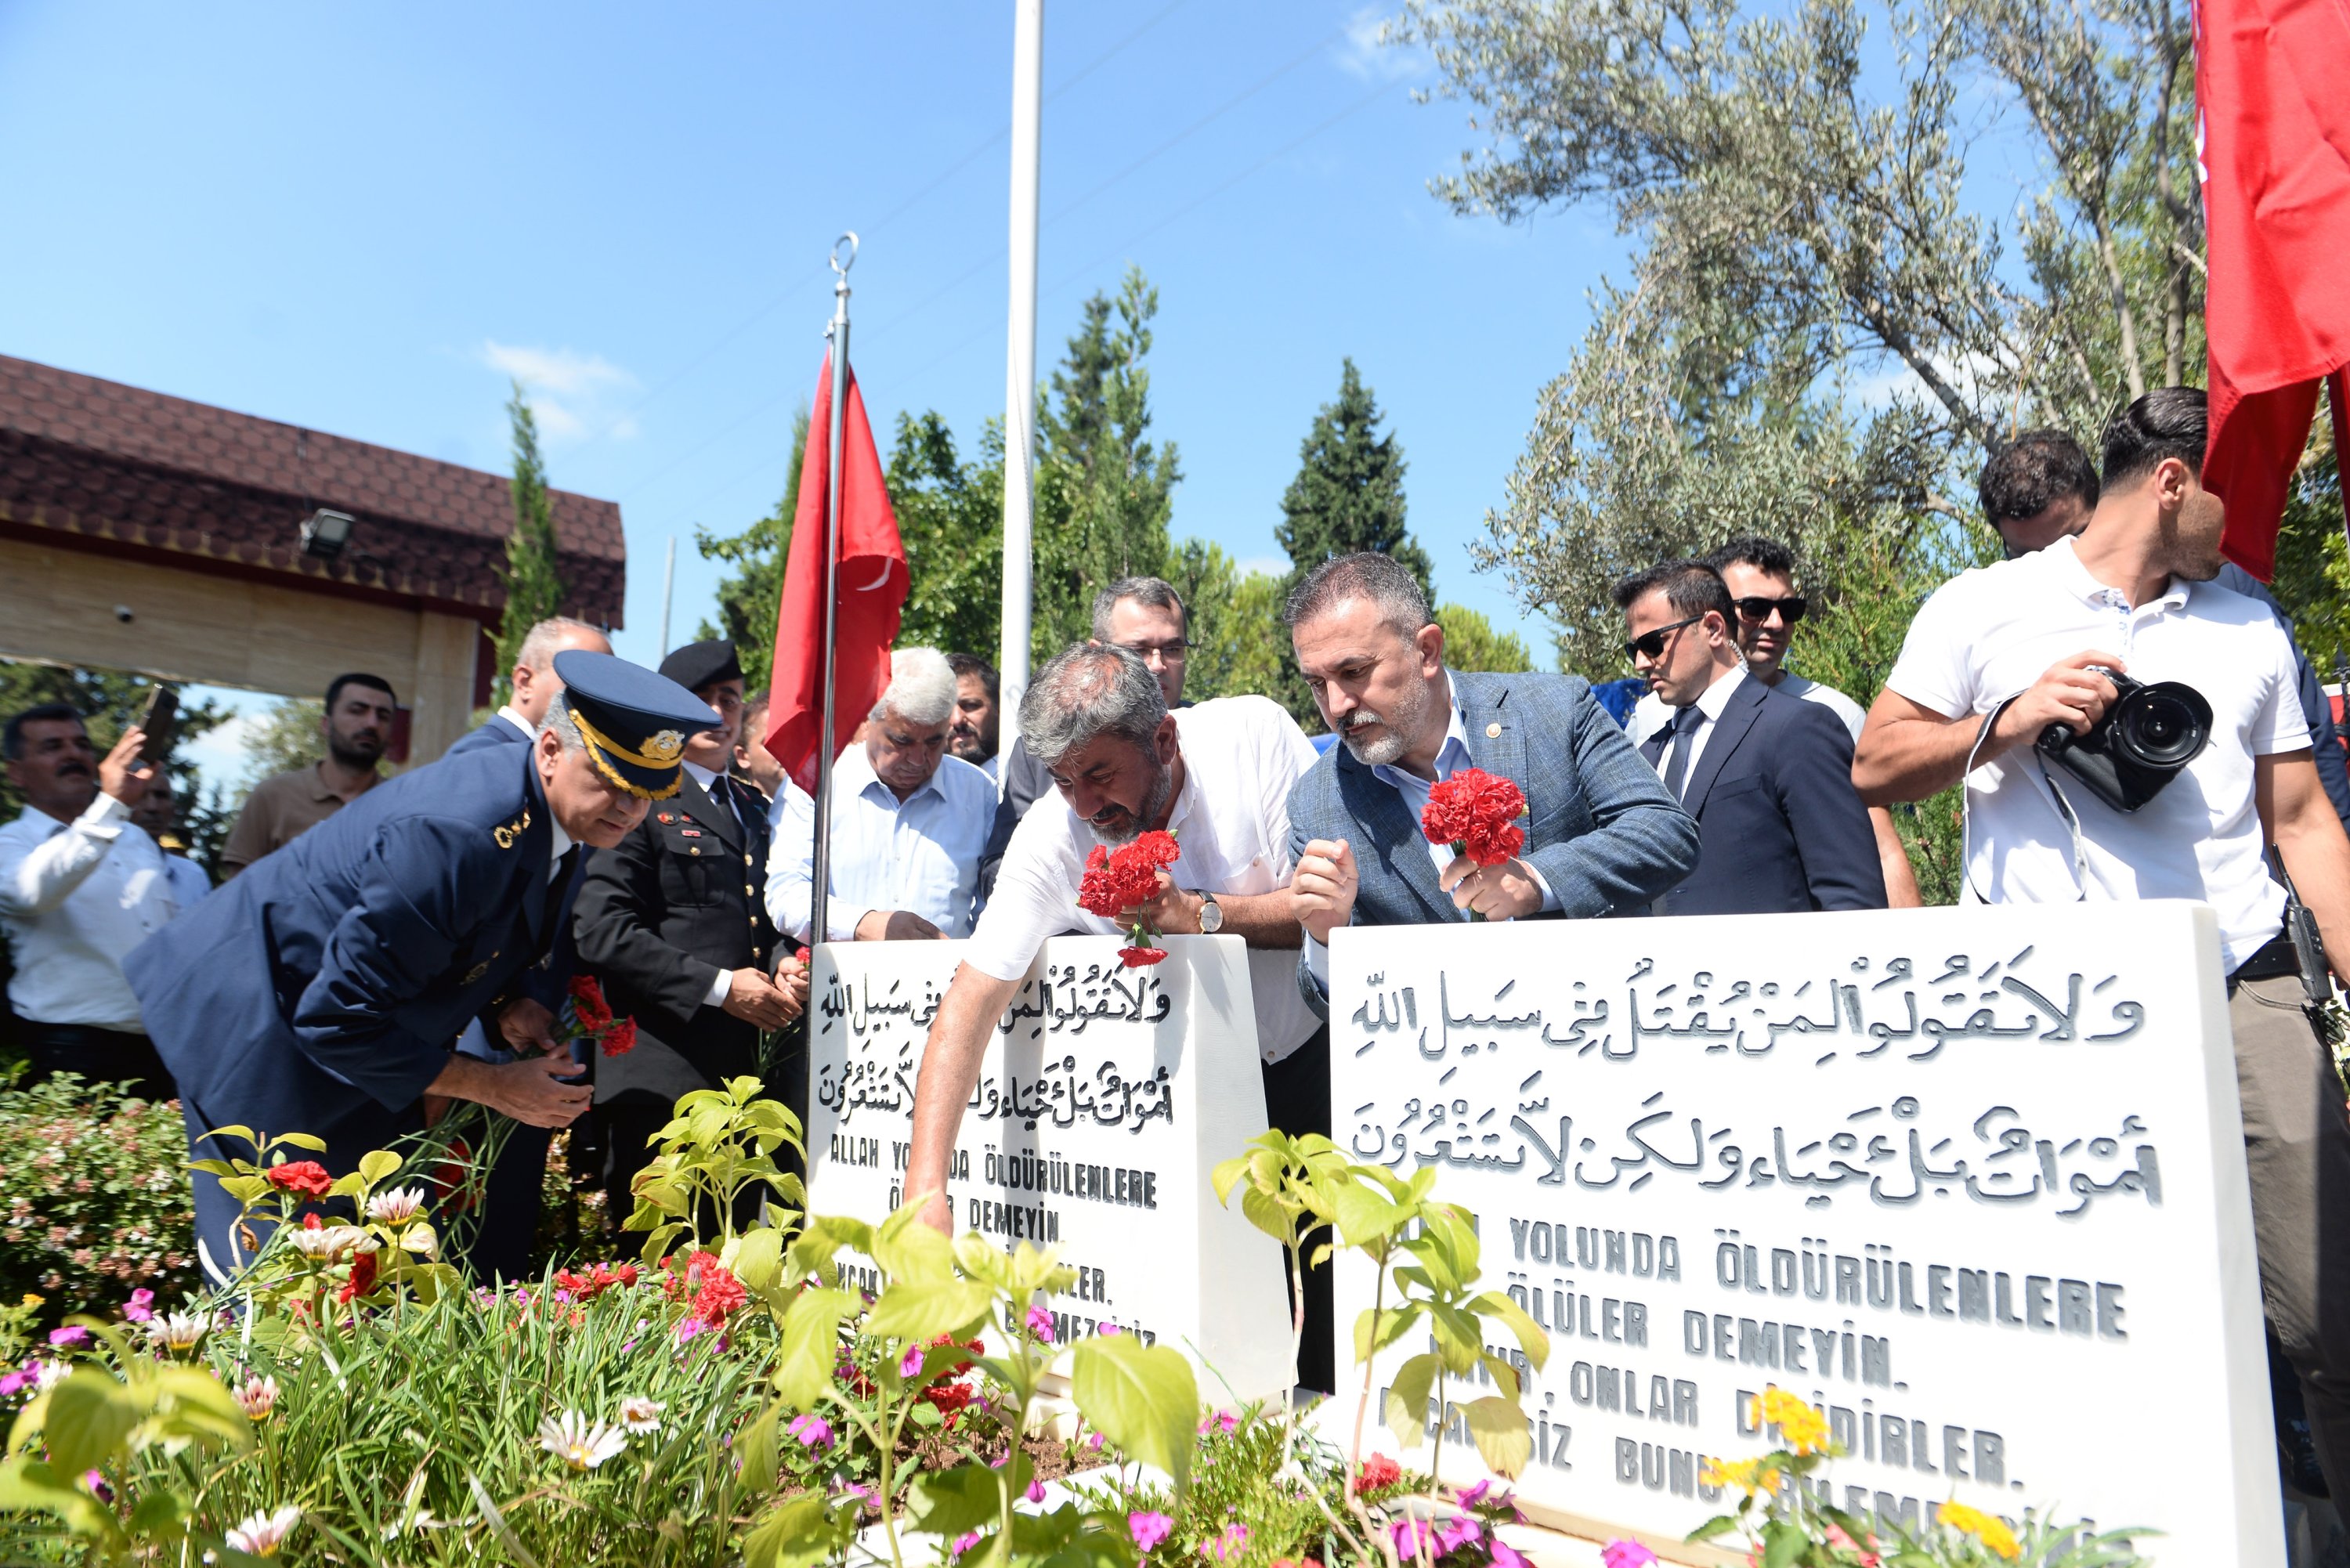 Hacı Ali Oruç (2nd L) leaves flowers on the graves of his two sons killed by putschists, in Adana, southern Turkey, July 15, 2022. (DHA PHOTO)